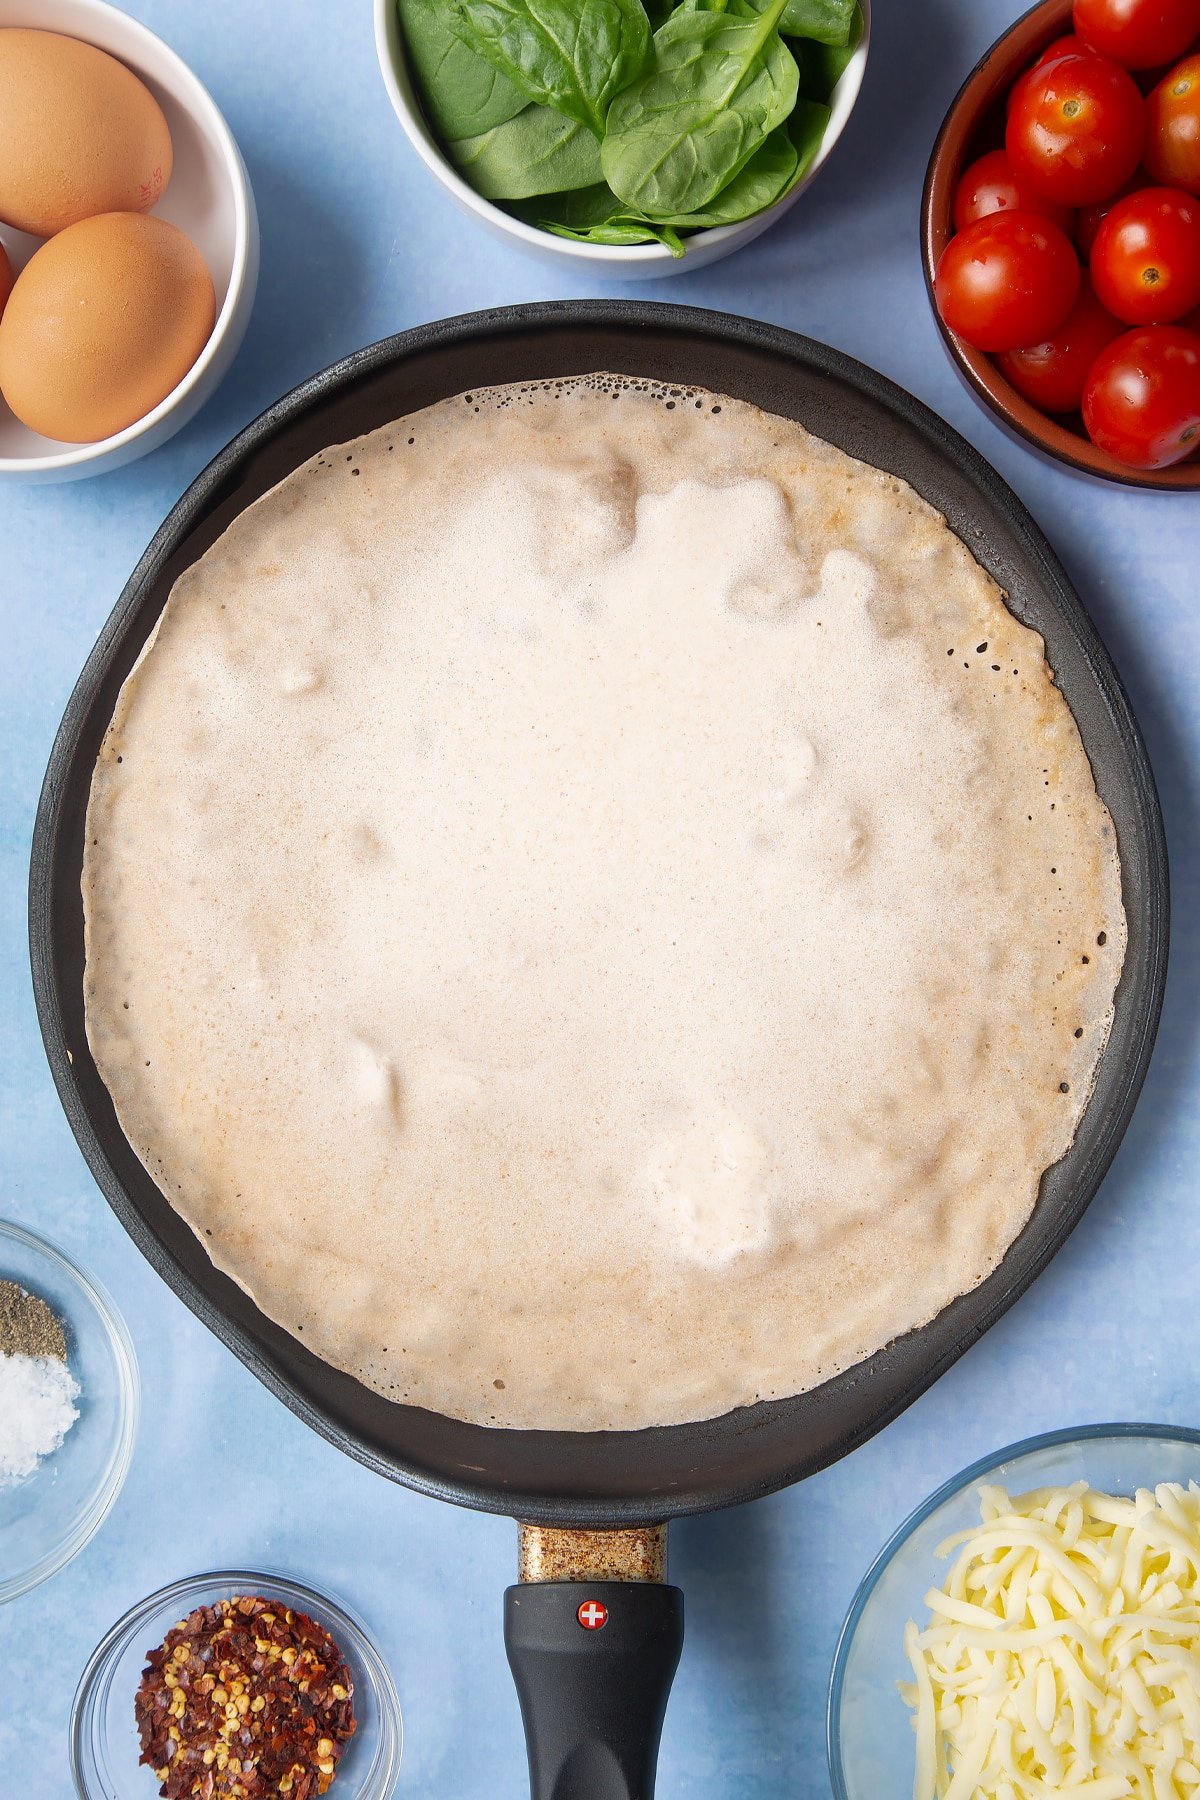 Buckwheat crepe batter in a crepe pan. Ingredients to make buckwheat galettes surround the pan.